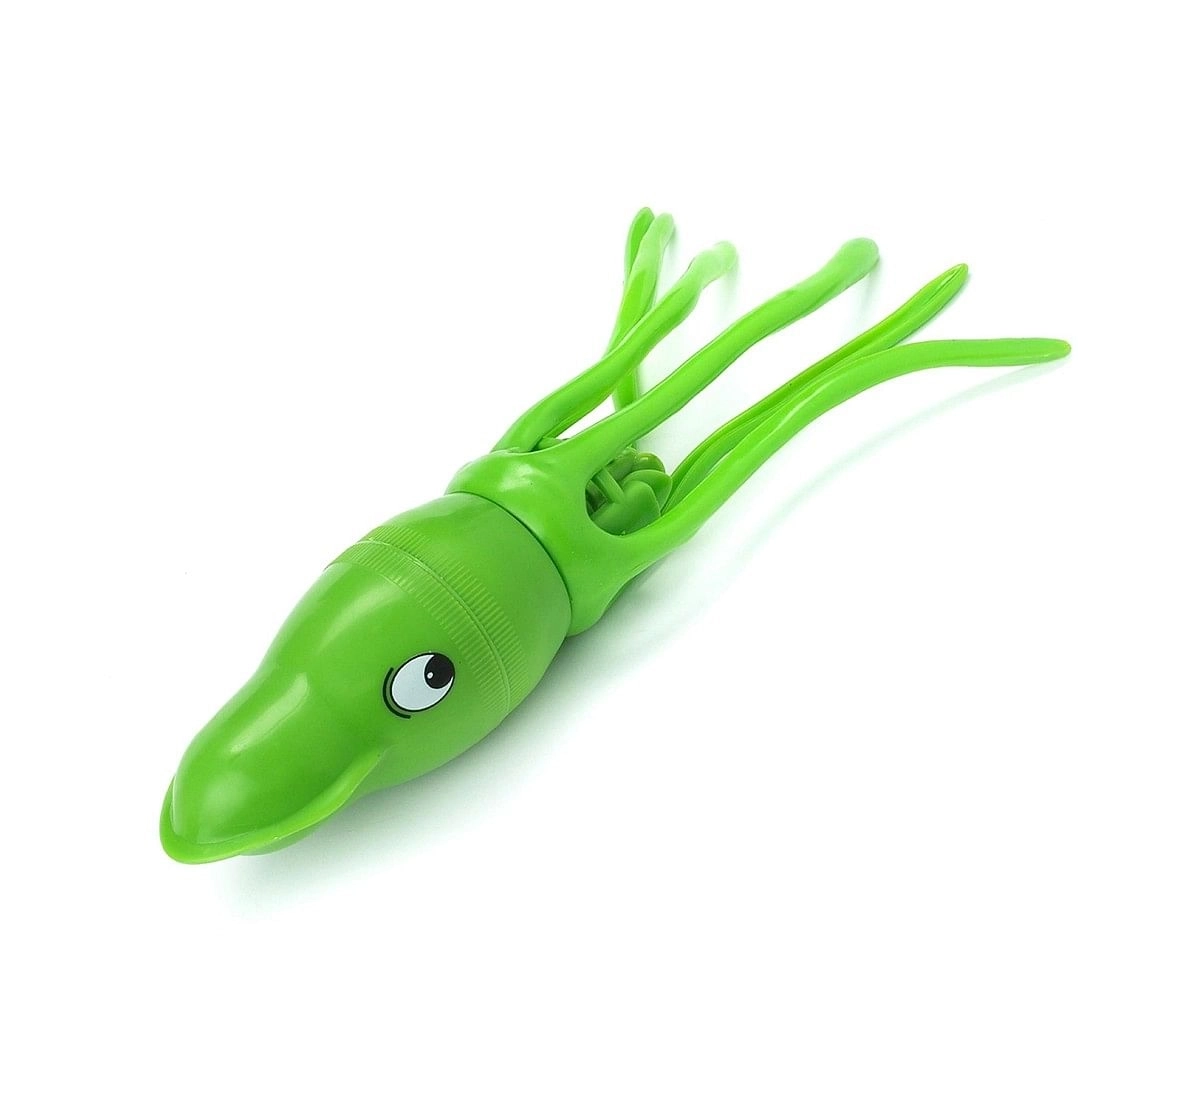  Hamleys Squiddy (Assorted Color) Bath Toys & Accessories for Kids age 3Y+ 